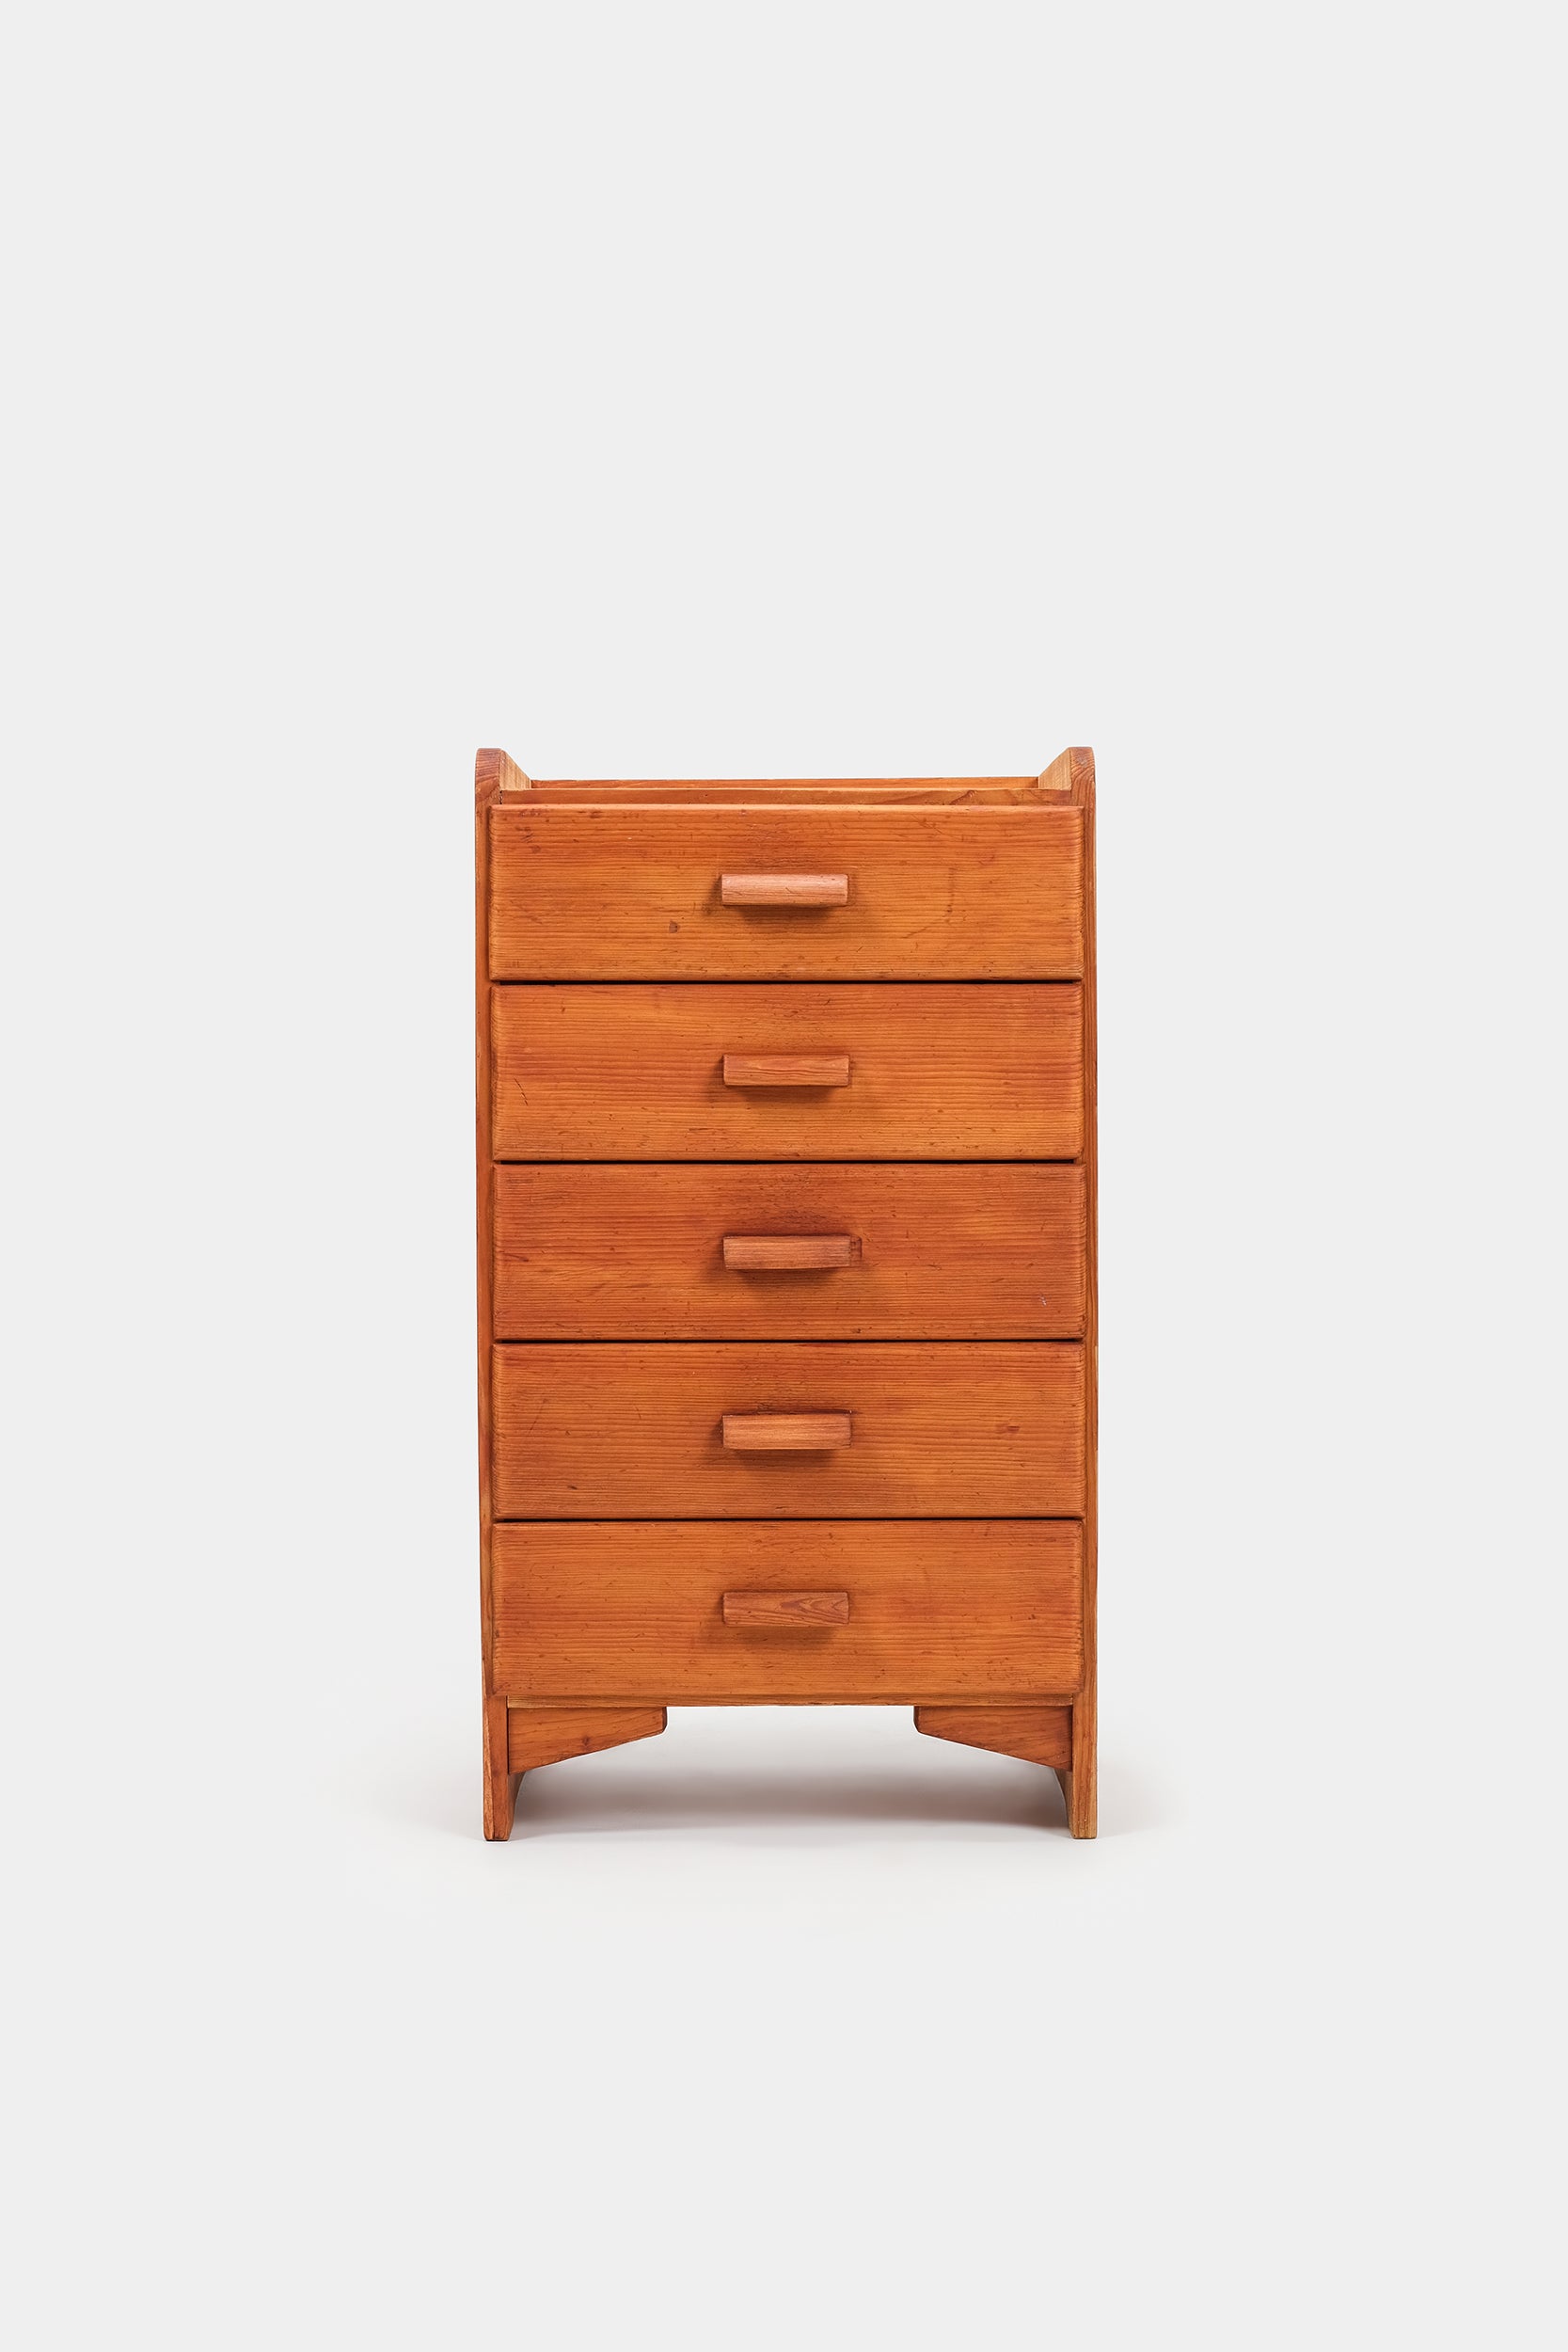 Chest of Drawers, Bauhaus, Germany, 20s